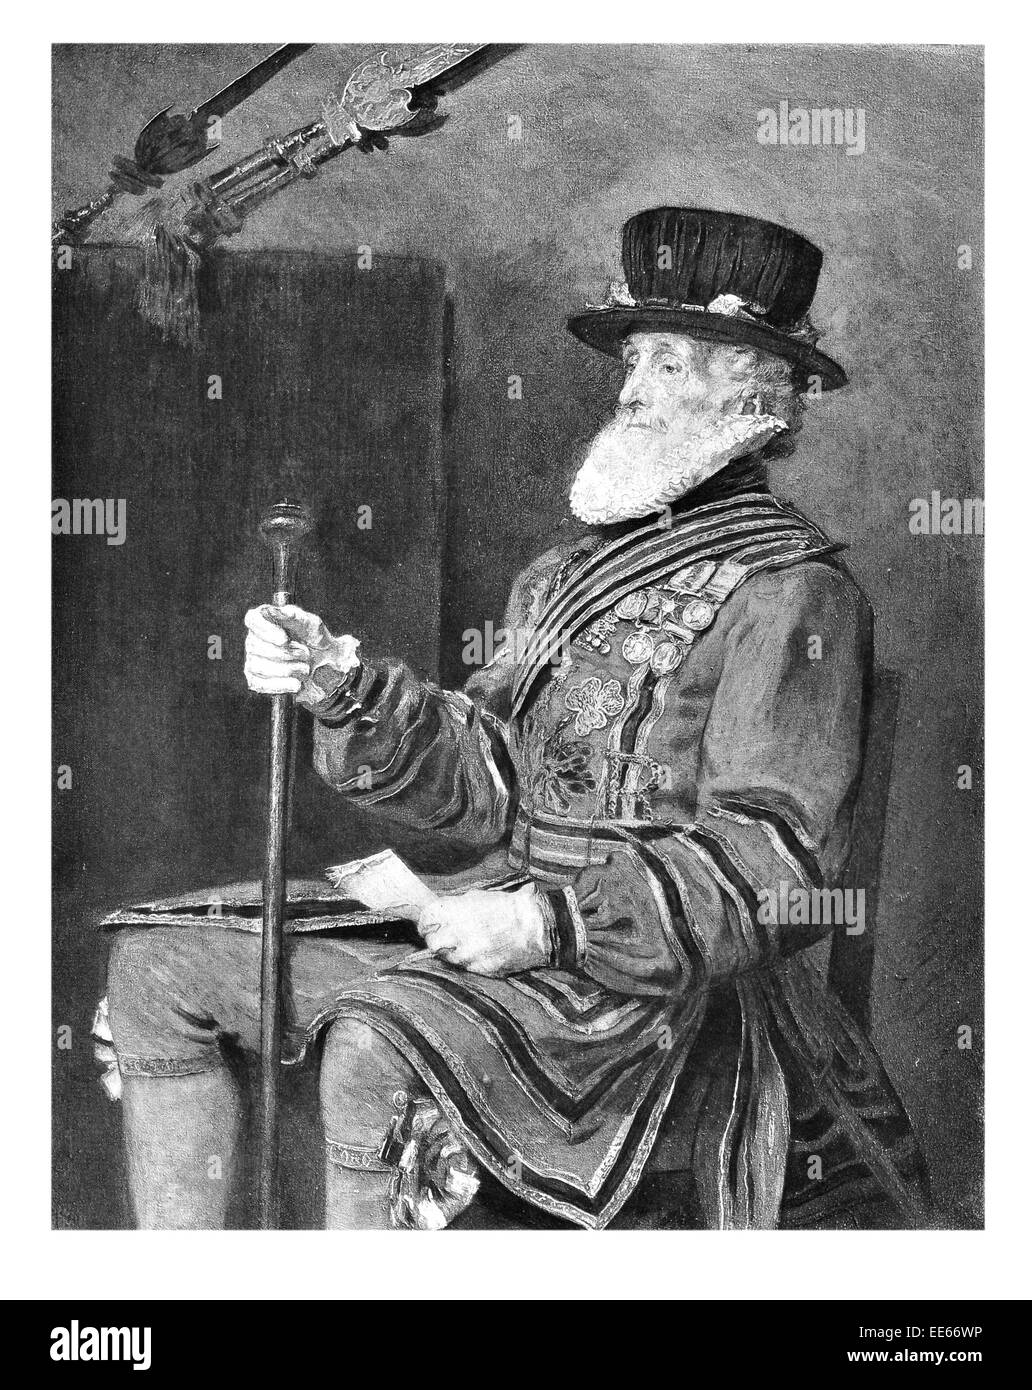 The Beefeater Sir John Everett Millais Yeoman of the Guard 1876 Royal  Warder Tower of London Body  ceremonial guardian costume Stock Photo